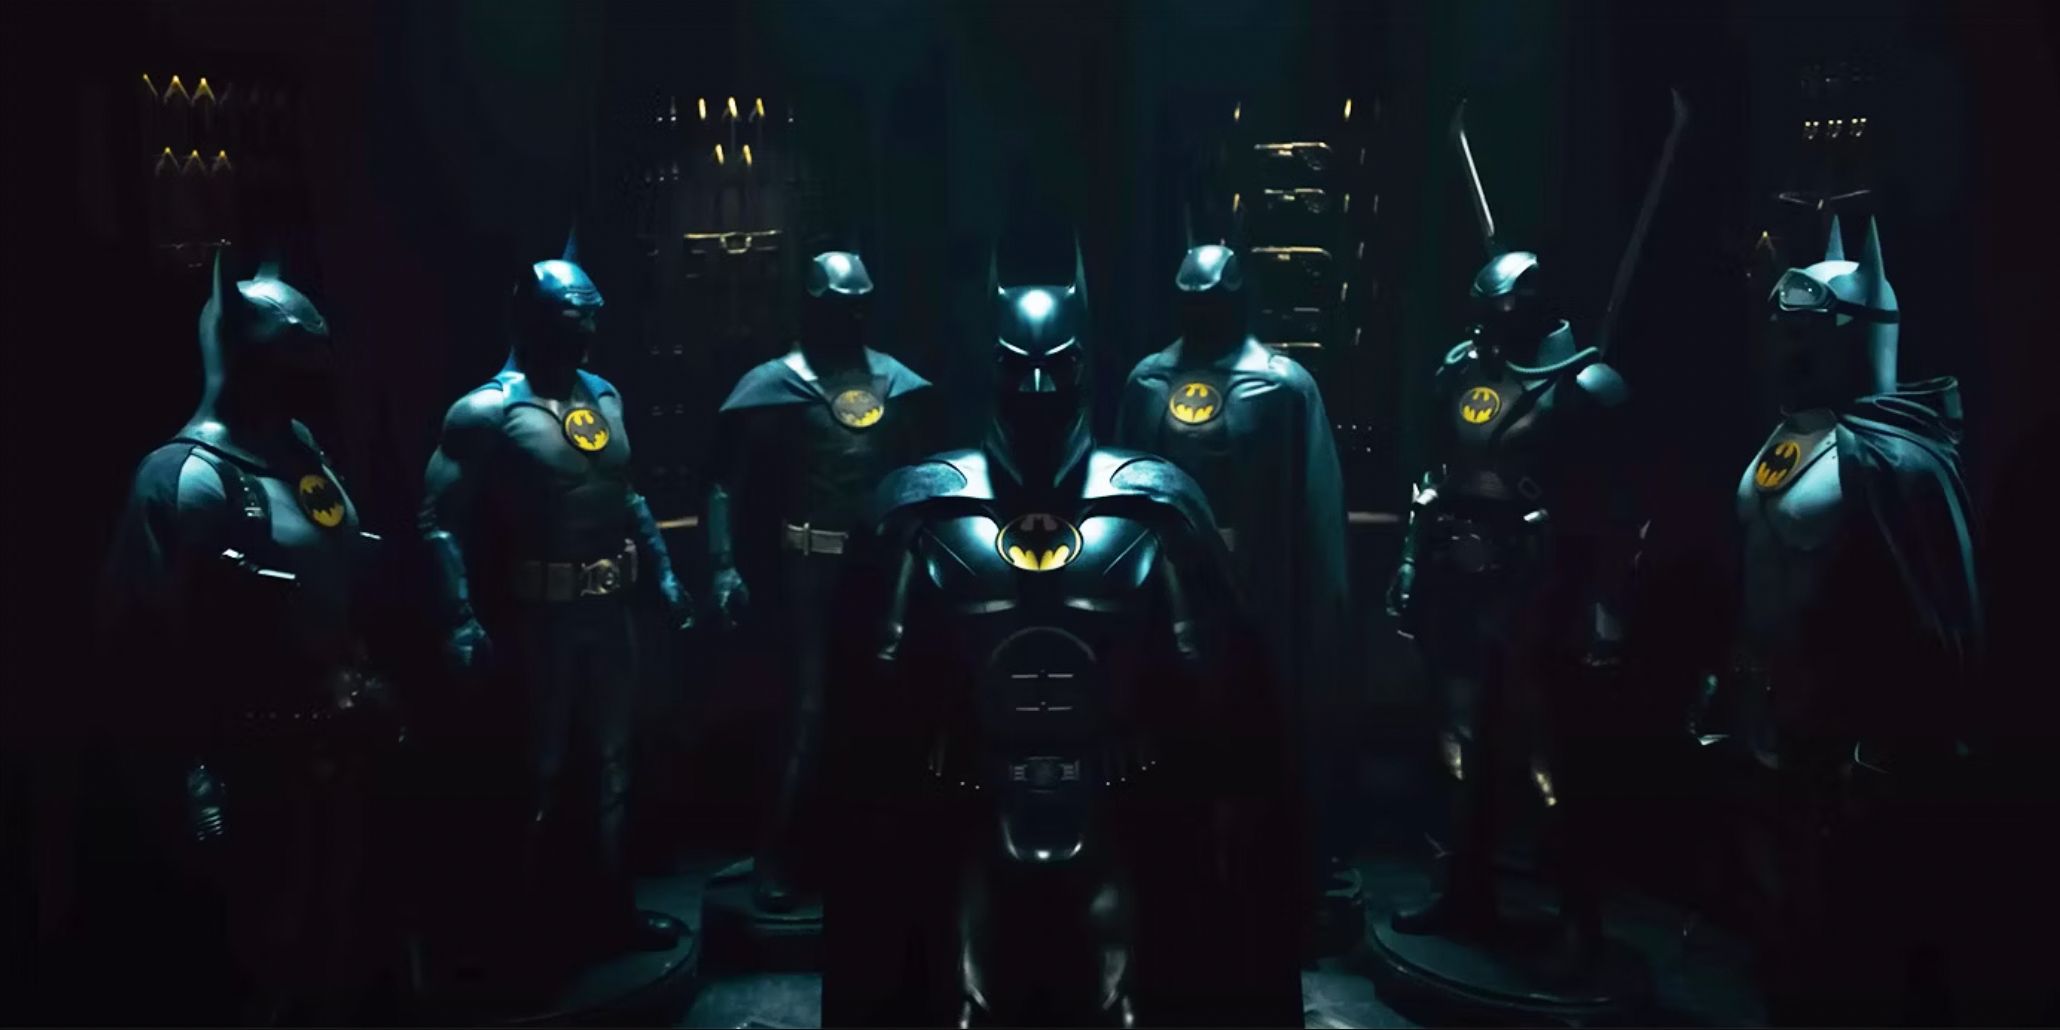 The seven Batman suits arranged on display in The Flash (2023)